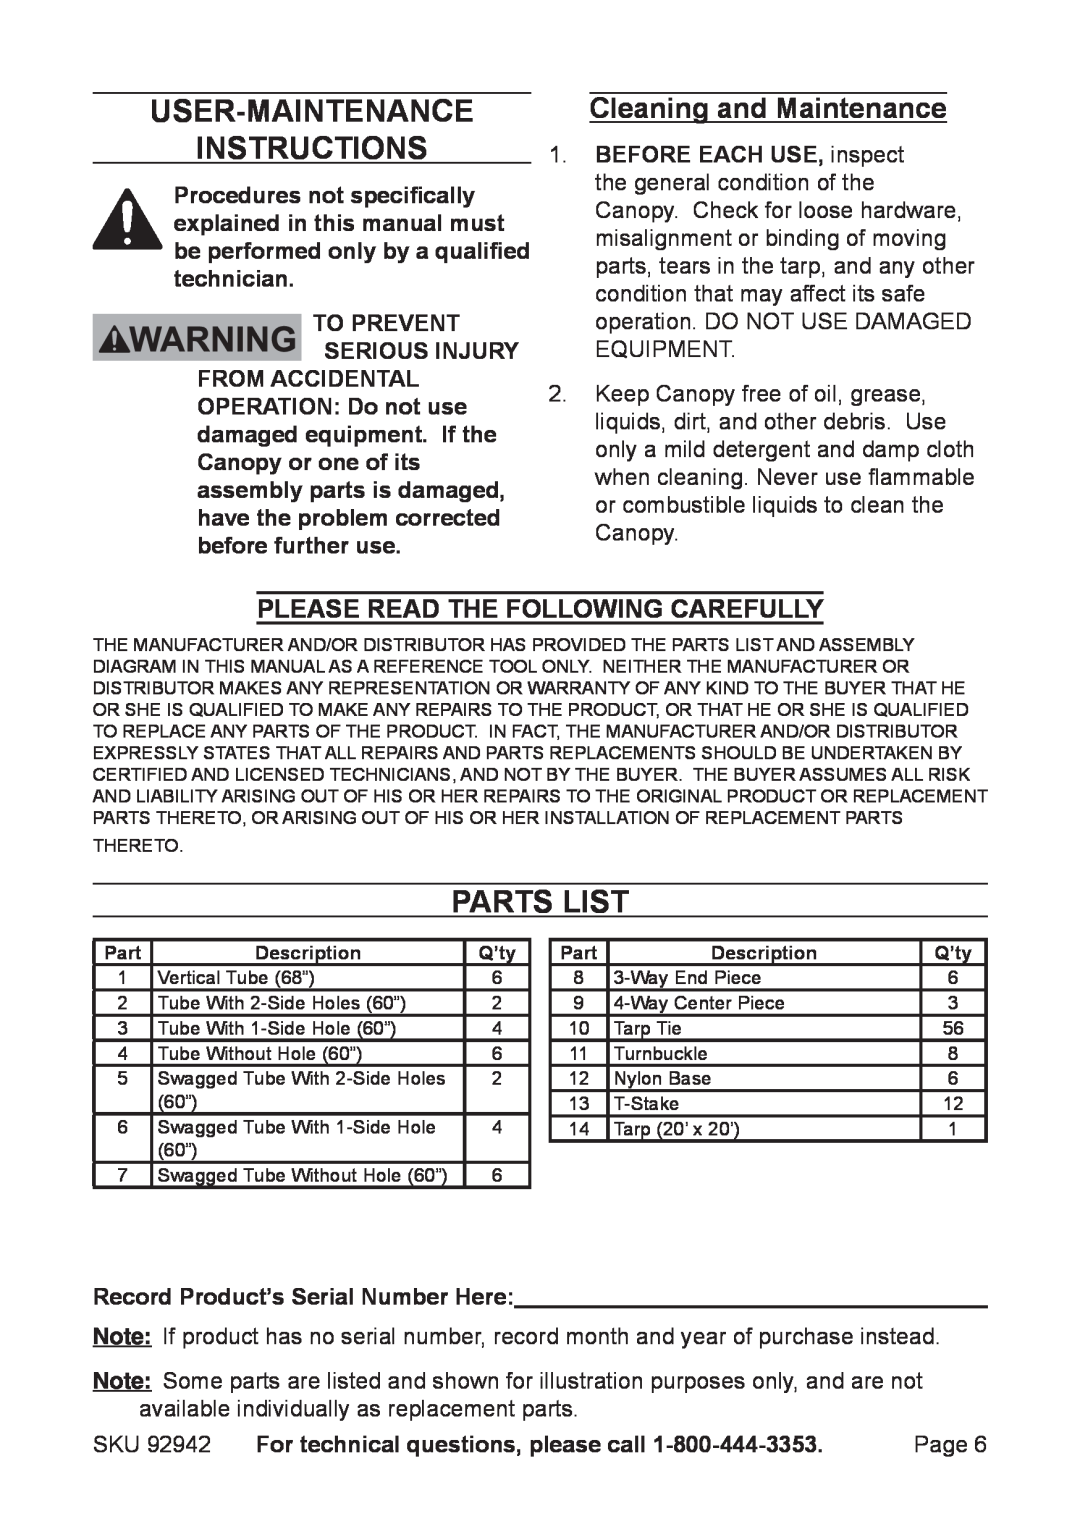 Harbor Freight Tools 92942 User-Maintenance Instructions, Parts List, Cleaning and Maintenance, To prevent serious injury 